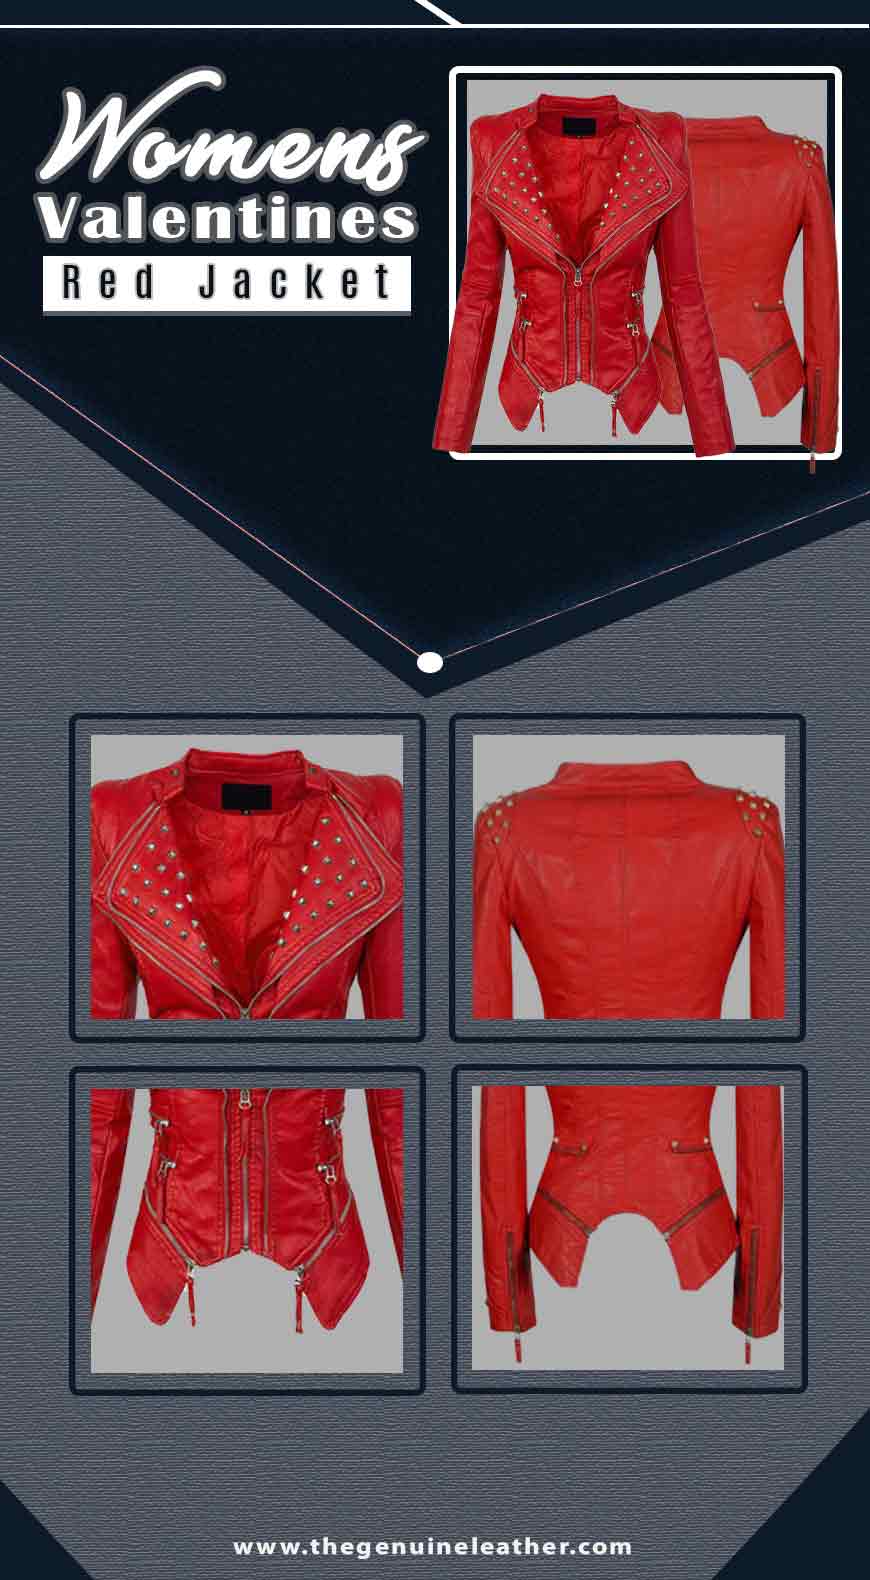 Womens Valentines Red Jacket Infographic